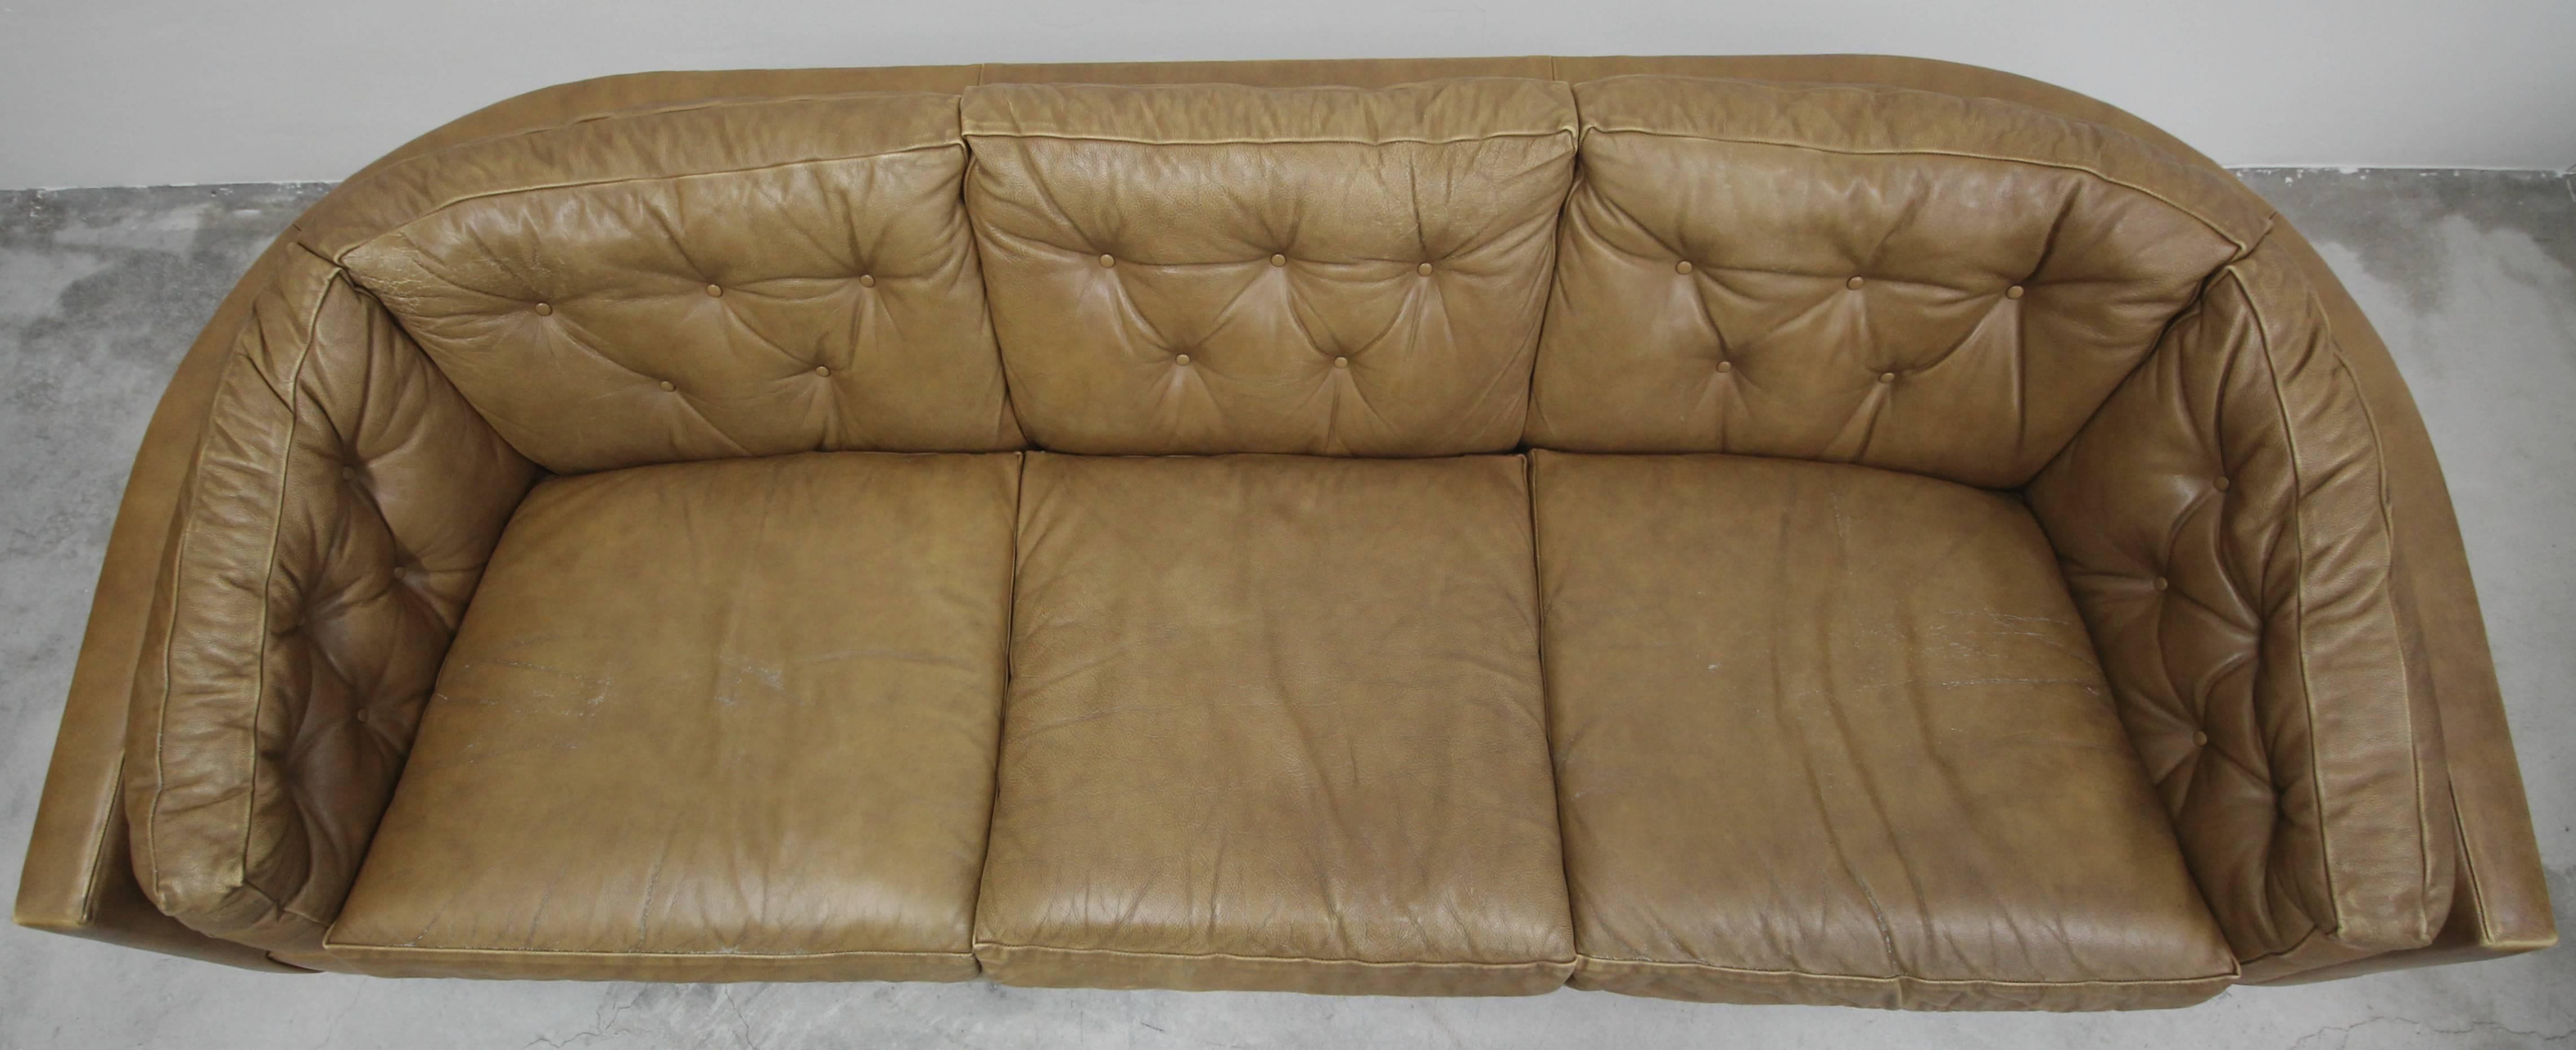 Rare Midcentury Cantilever Leather and Bronze Barrel Sofa by Milo Baughman 6